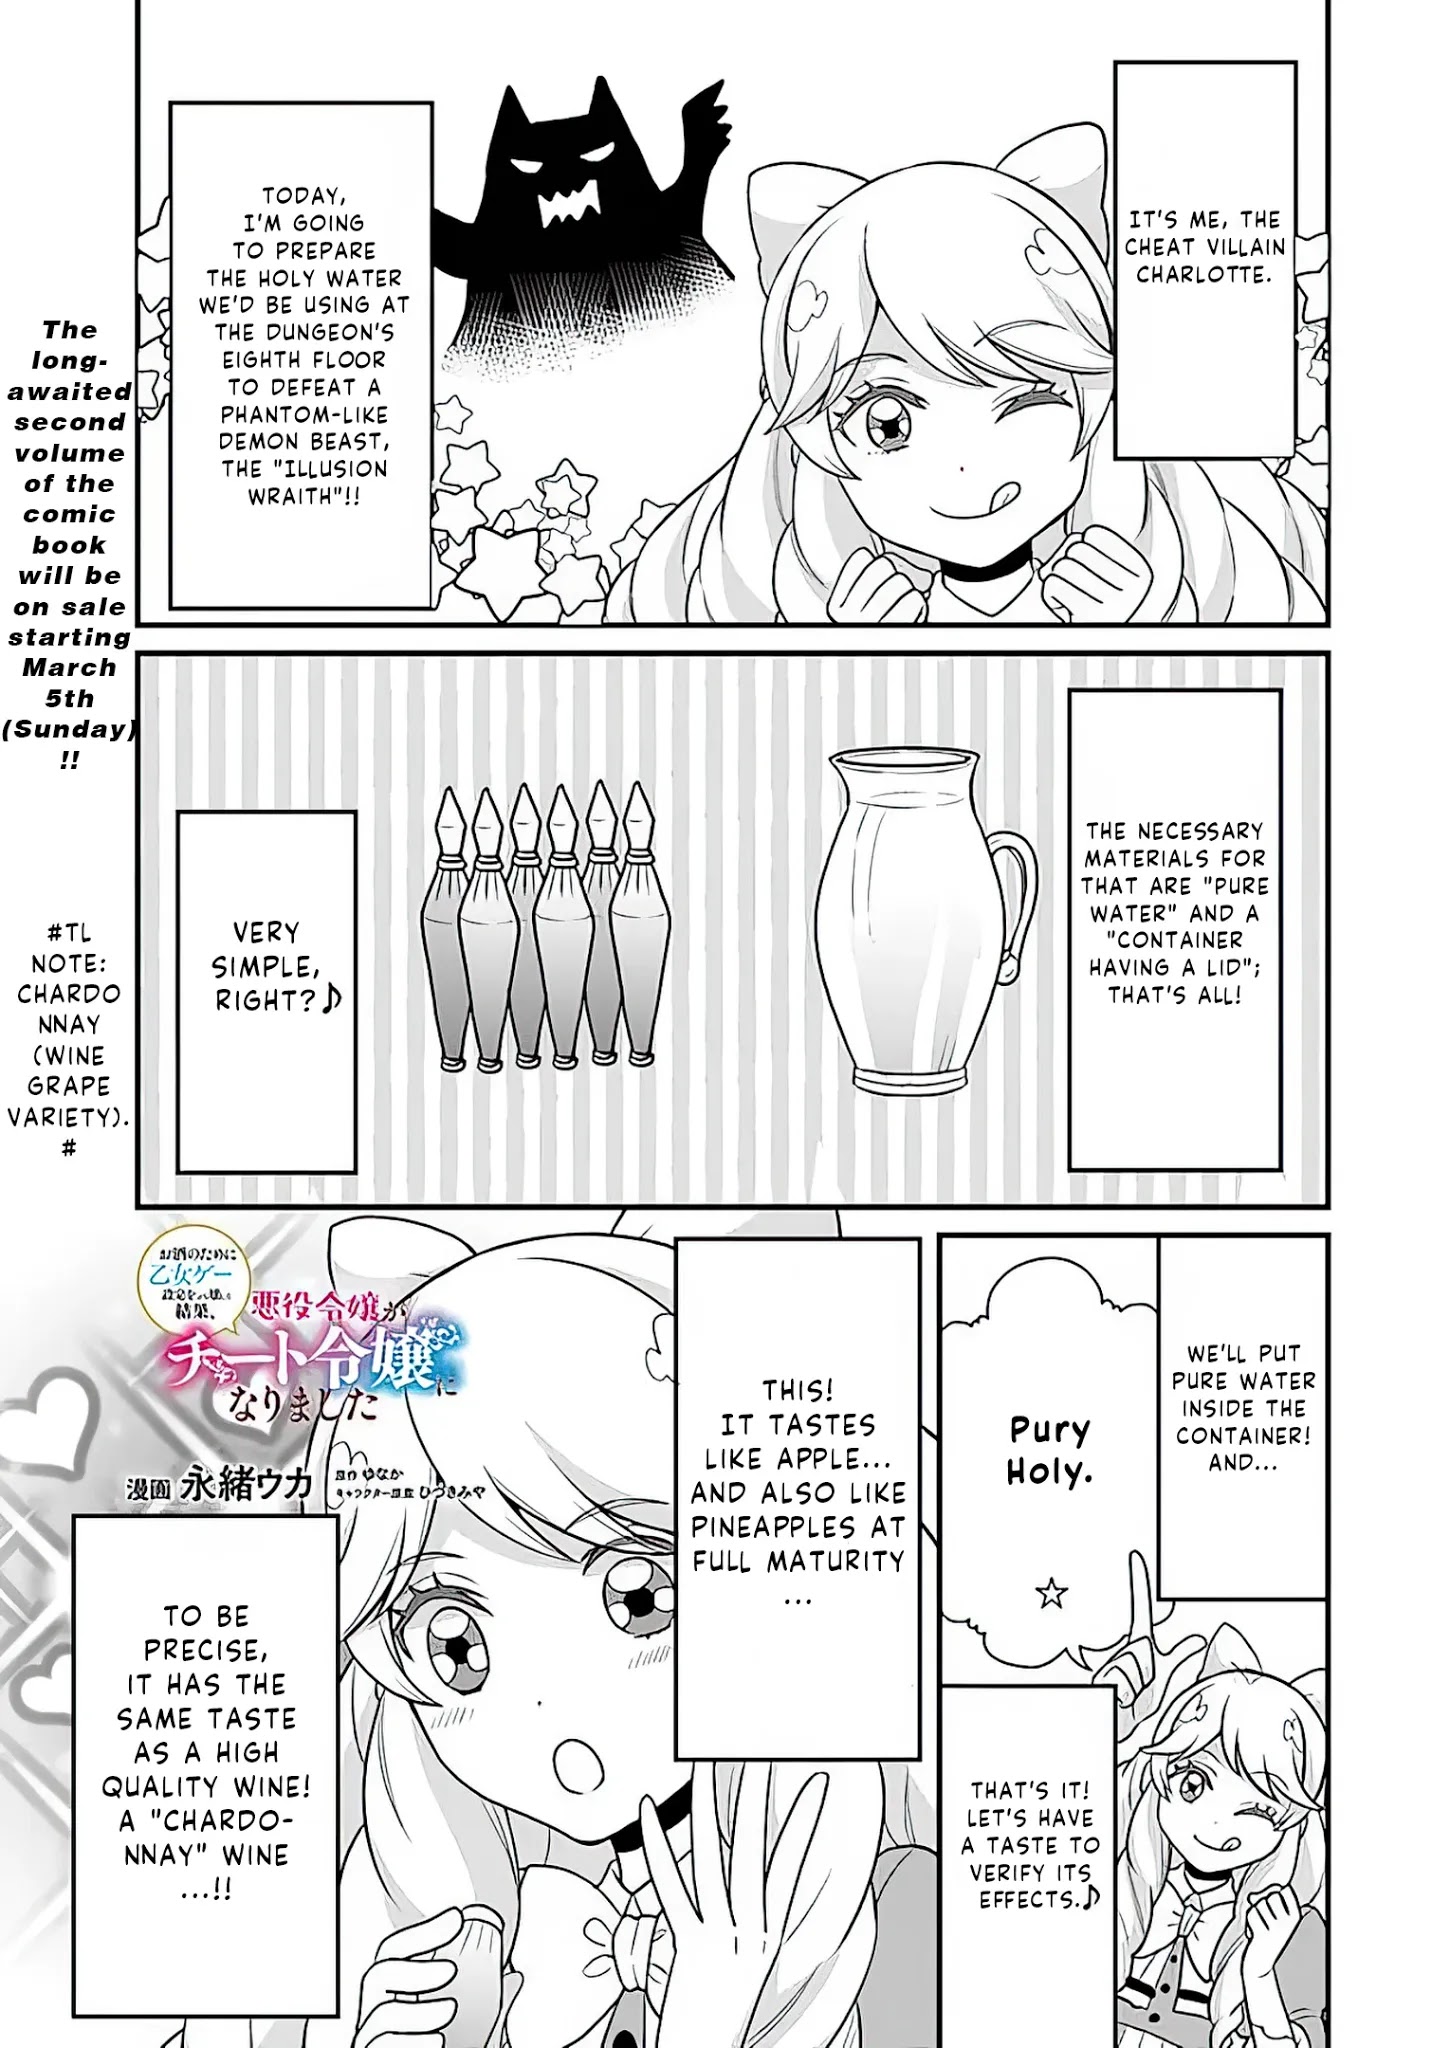 As A Result Of Breaking An Otome Game, The Villainess Young Lady Becomes A Cheat! - Page 2